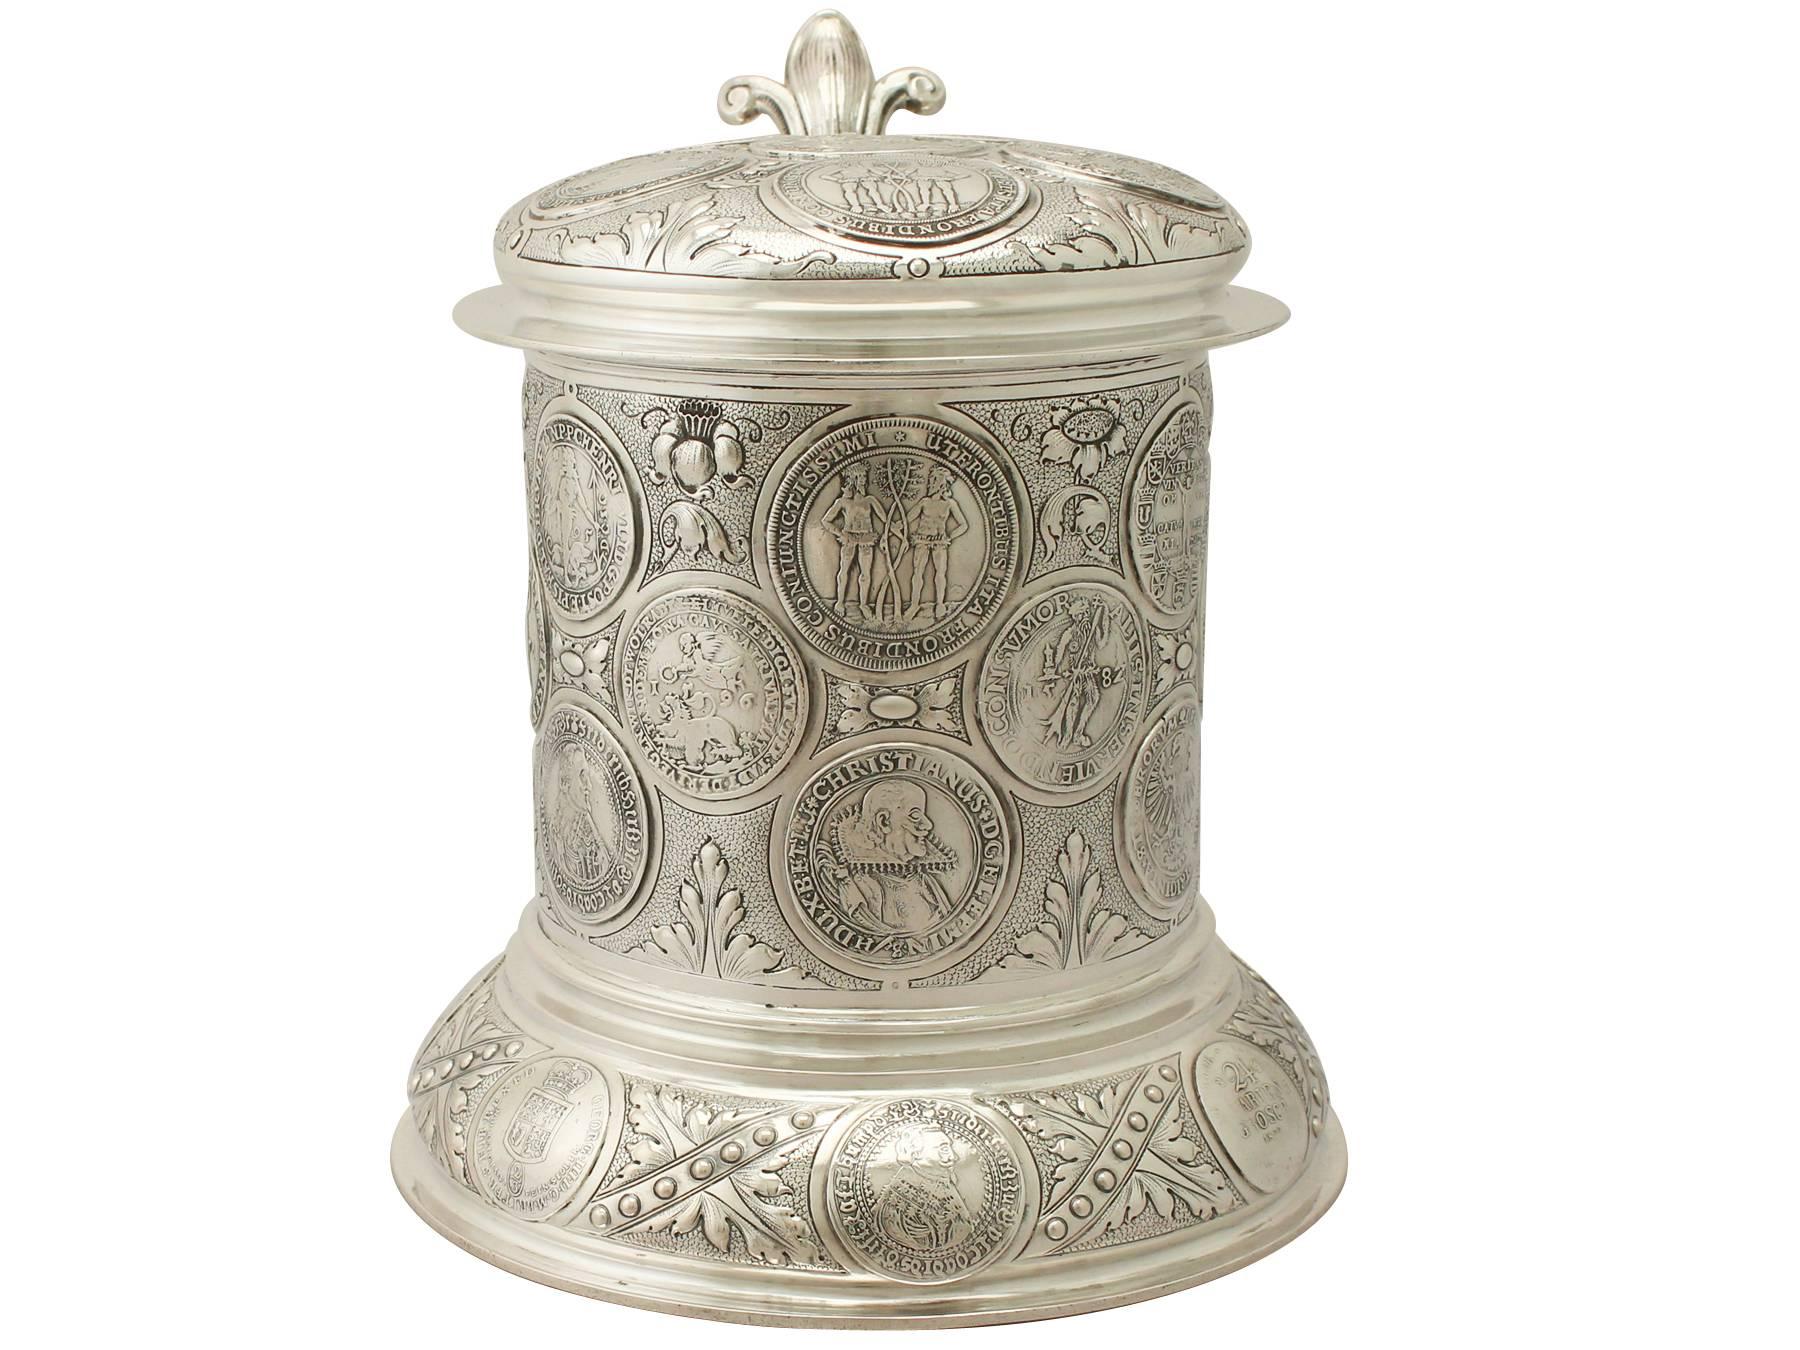 An exceptional, fine and impressive, large antique German 800 standard silver quart and a half coin tankard; an addition to our range of collectable silverware.

This exceptional antique German 800 standard silver tankard has a plain tapering